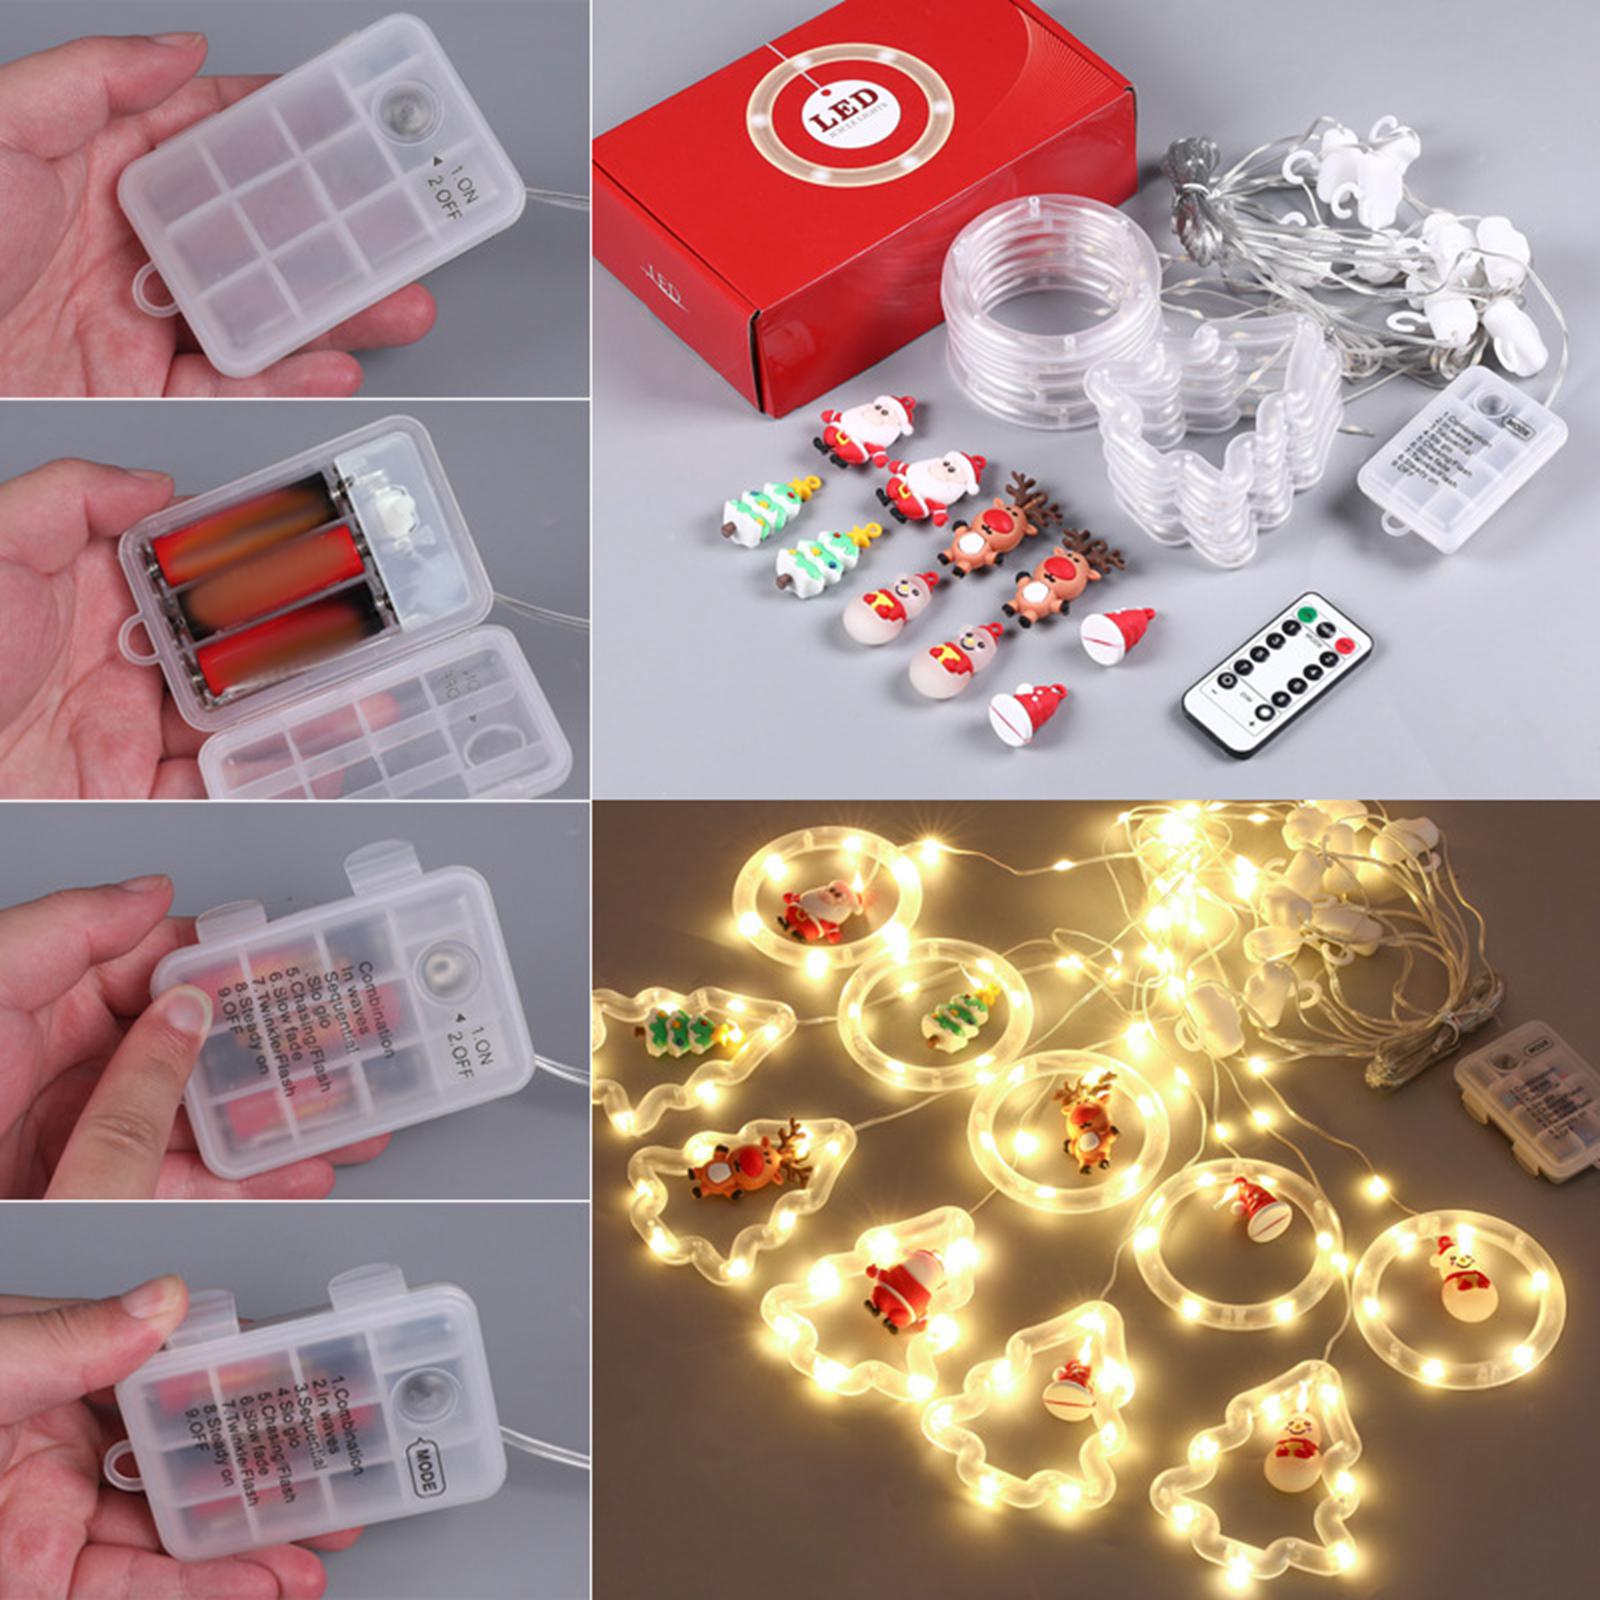 LED Christmas String Light Hanging Ornament for Outdoor Home Decoration 3 AA Battery